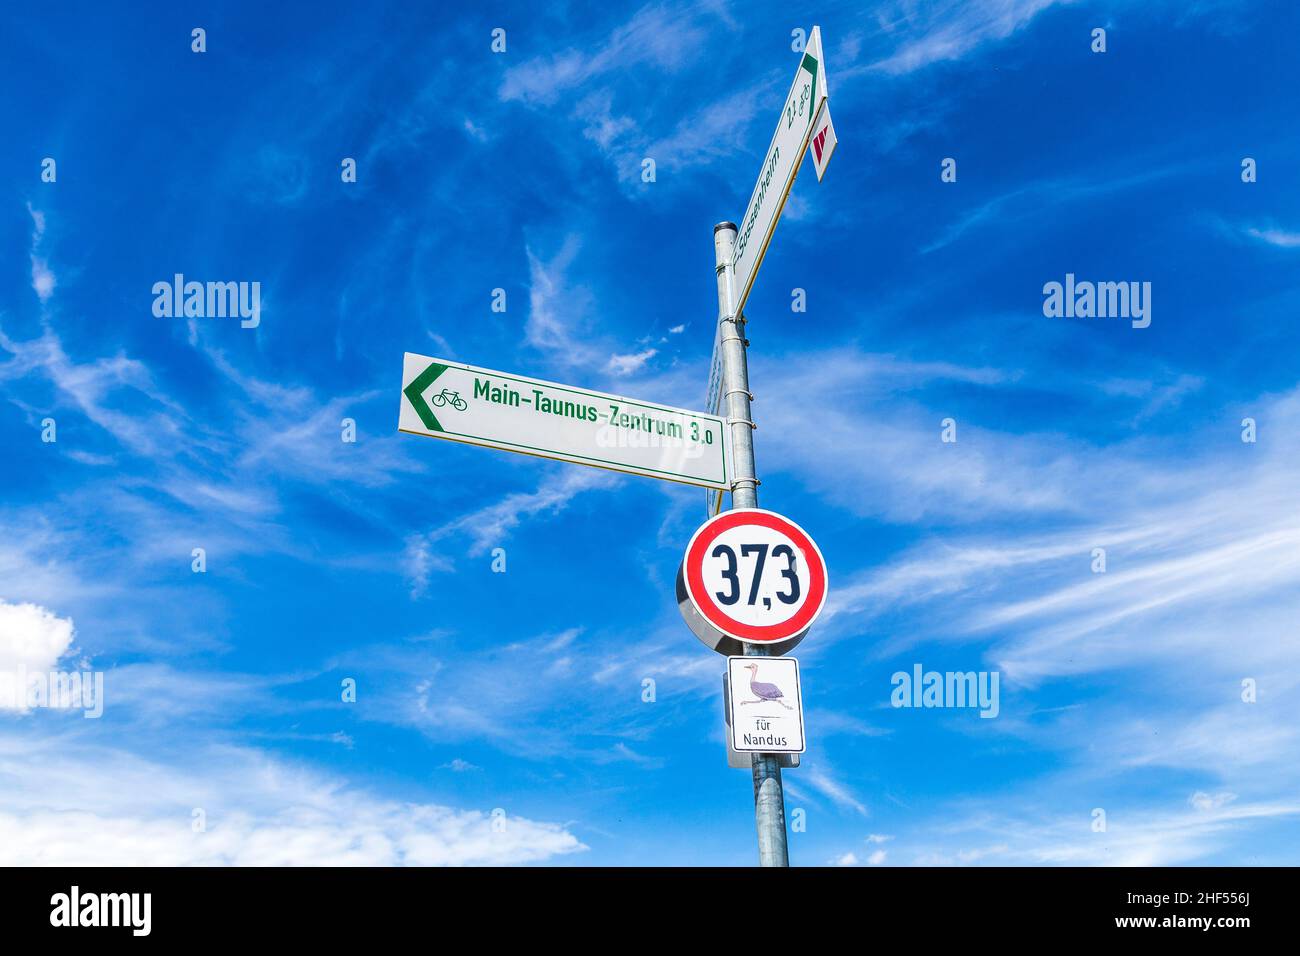 street sign for nandus under blue sky in Germany Stock Photo